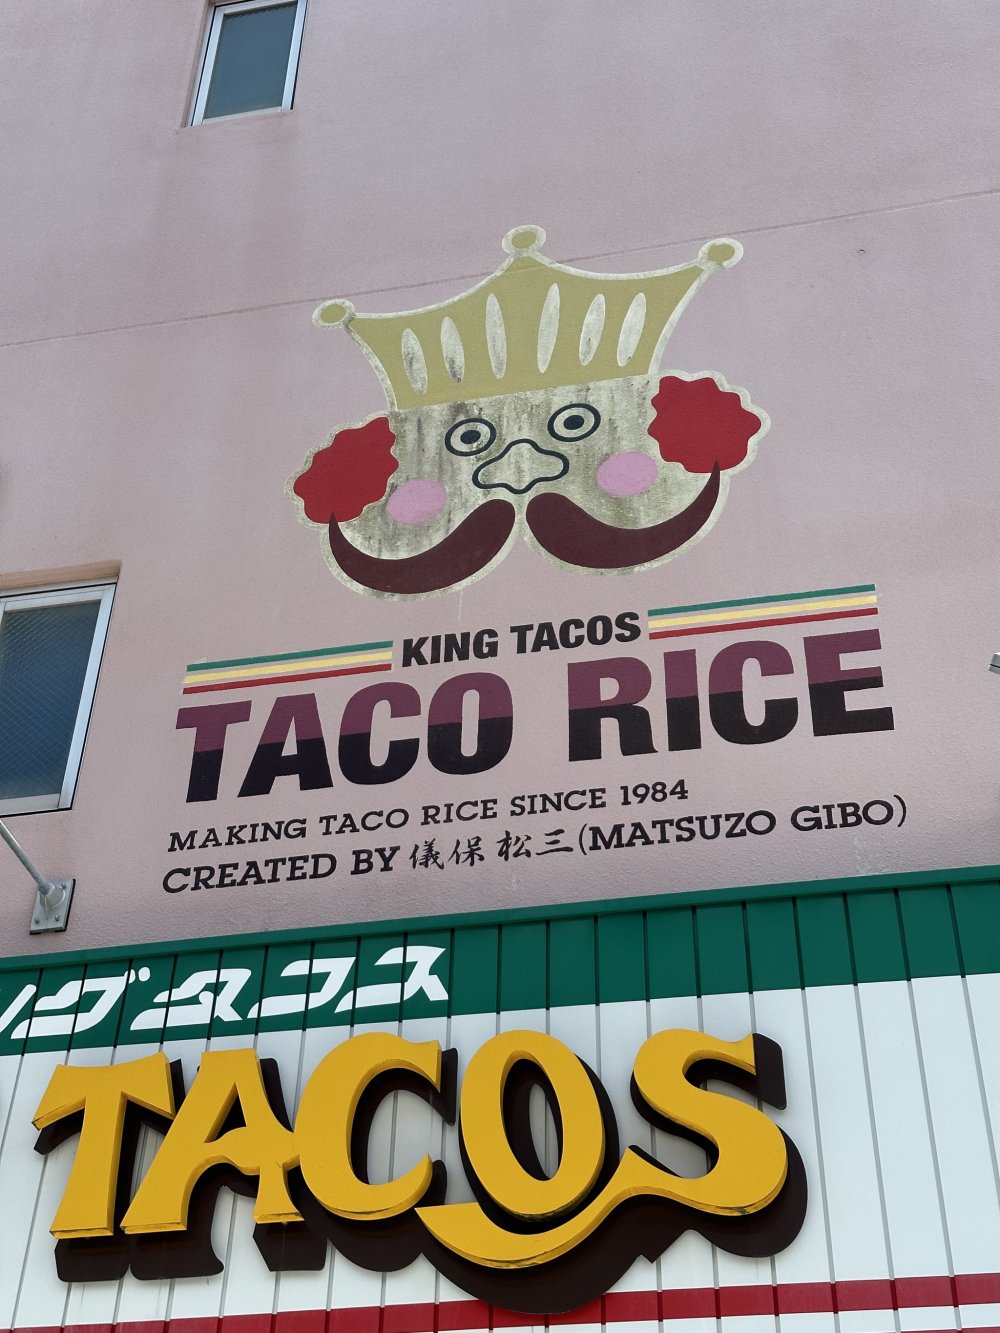 King Tacos, the original store in Kin Town